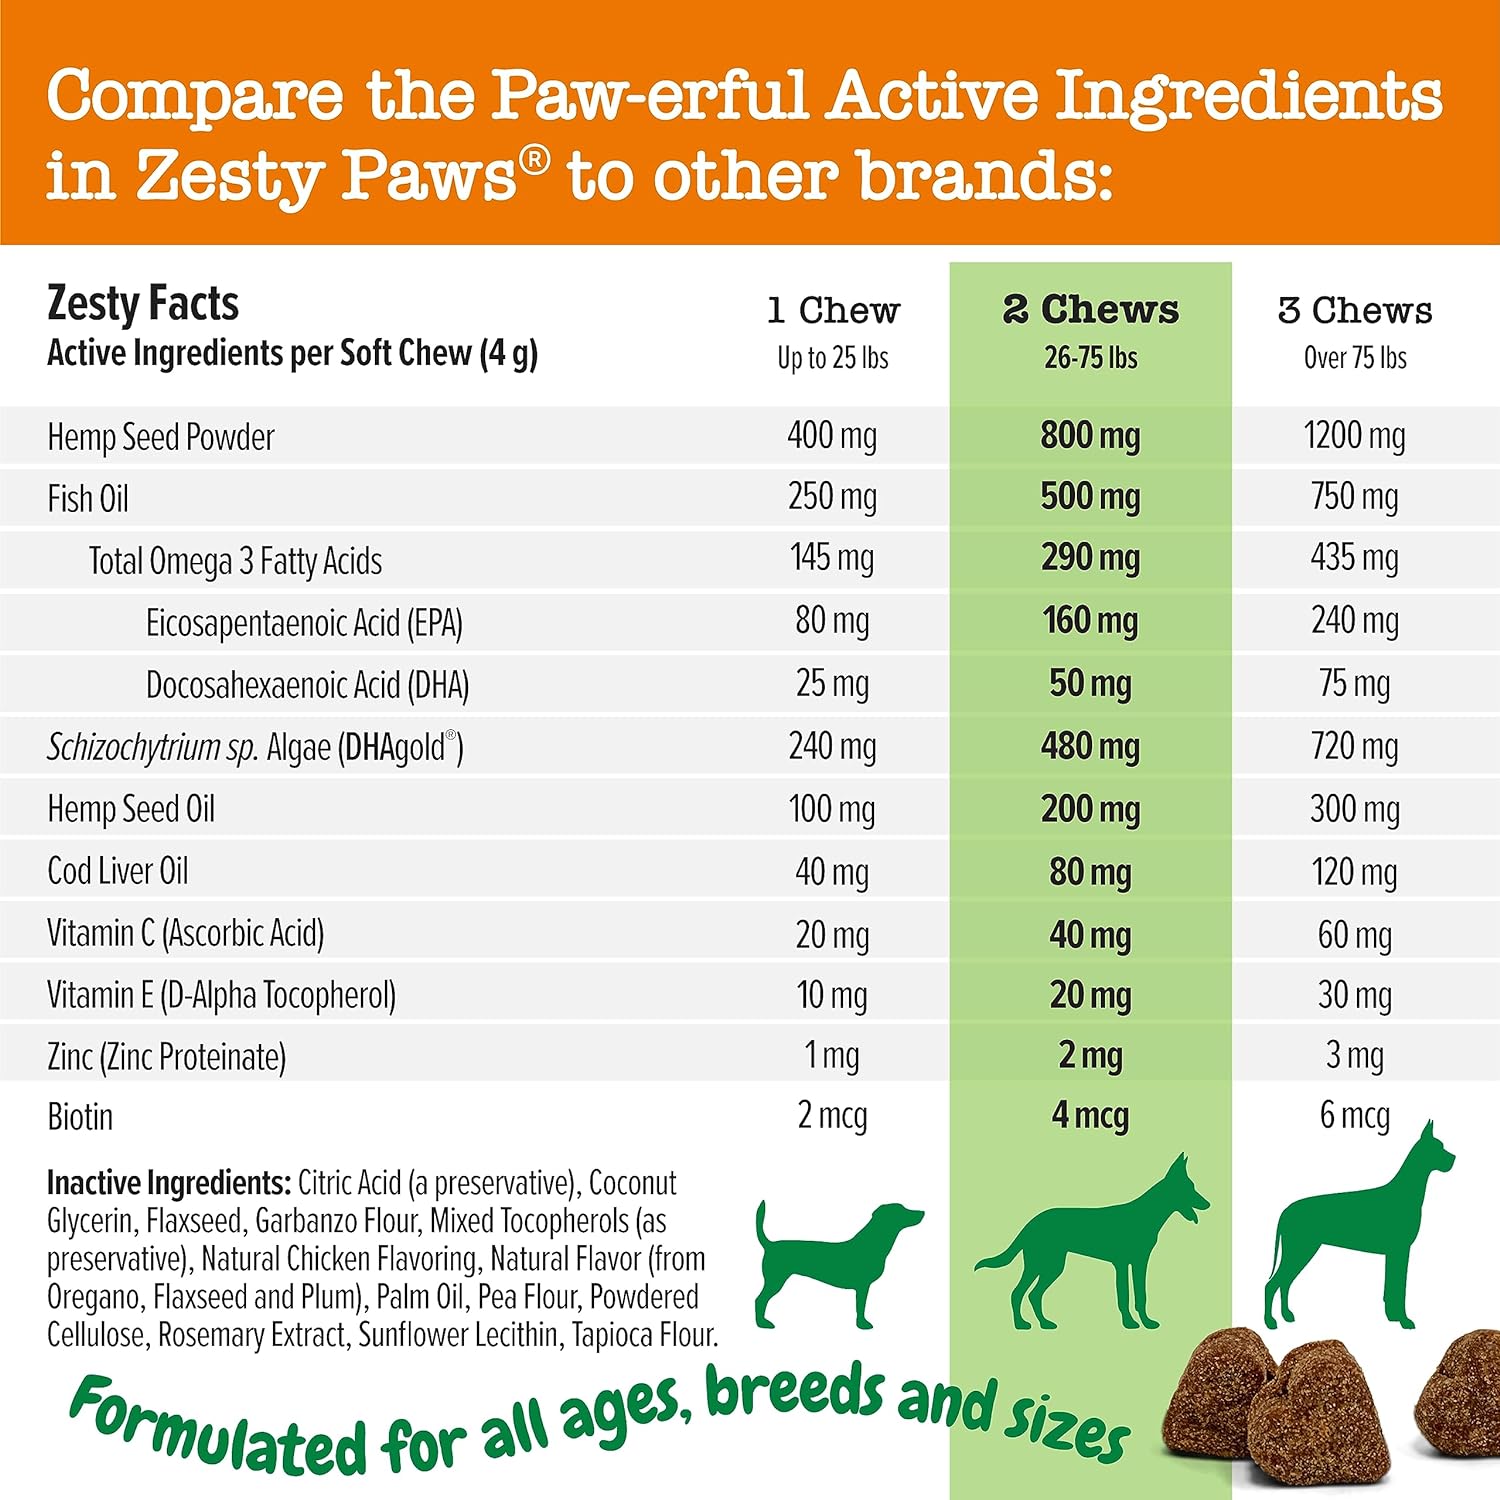 Zesty Paws Skin & Coat Bites for Dogs – Fish Oil Soft Chews with Omega-3 Fatty Acids EPA & DHA - Skin, Coat, Antioxidant & Immune Support - Hemp - 90 Count